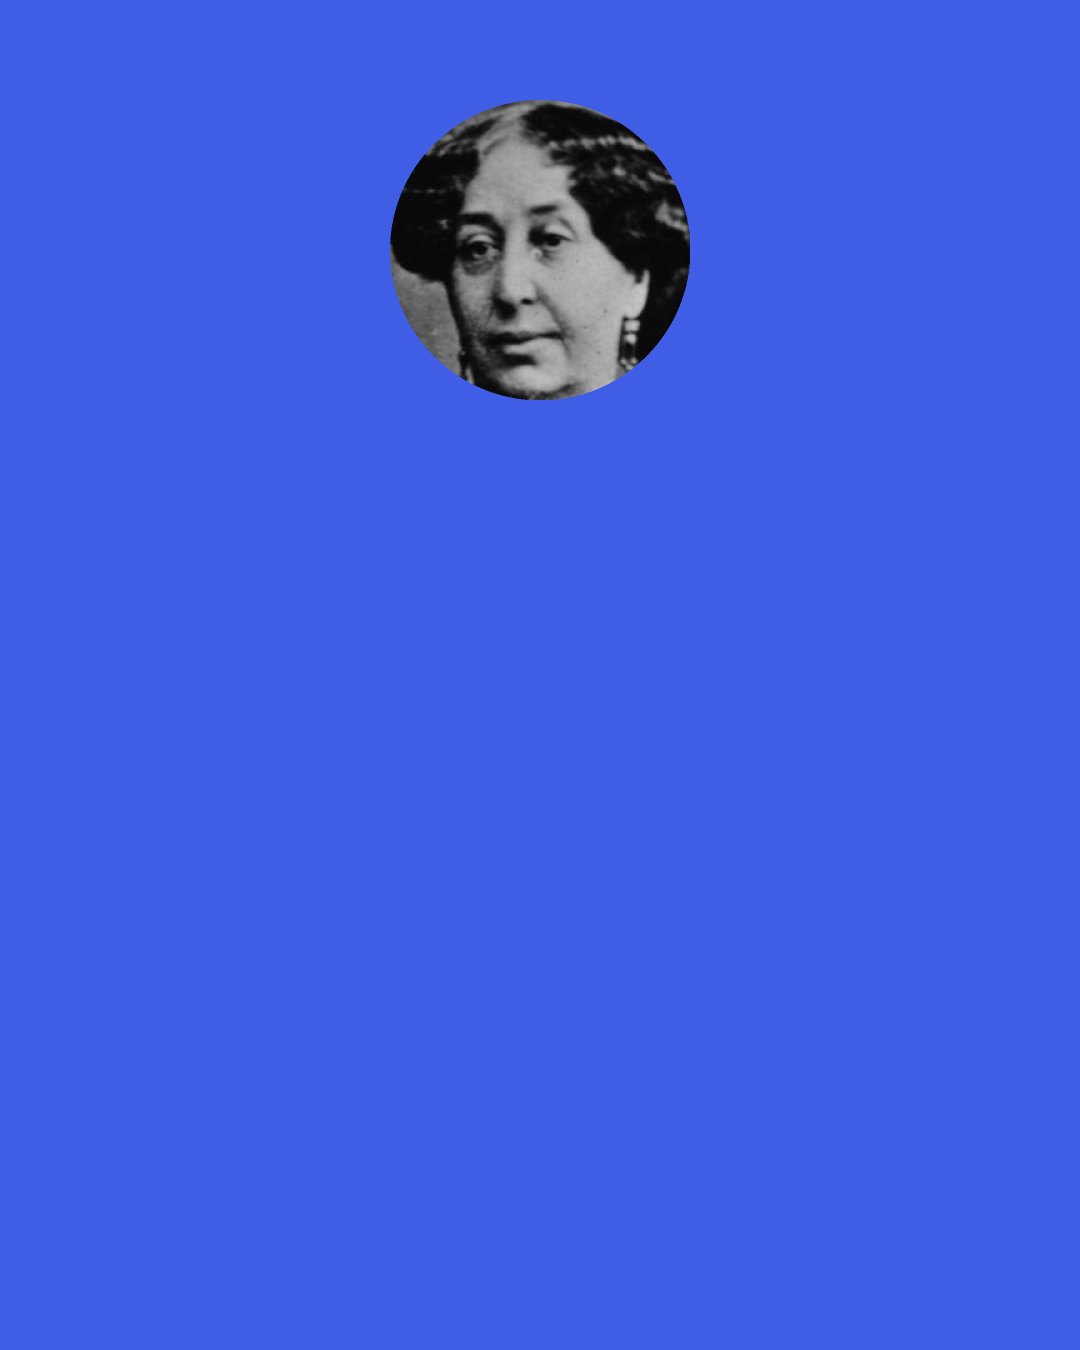 George Sand: Nothing is so easy as to deceive one’s self when one does not lack wit and is familiar with all the niceties of language. Language is a prostitute queen who descends and rises to all roles. Disguises herself, arrays herself in fine apparel, hides her head and effaces herself; an advocate who has an answer for everything, who has always foreseen everything, and who assumes a thousand forms in order to be right. The most honorable of men is he who thinks best and acts best, but the most powerful is he who is best able to talk and write